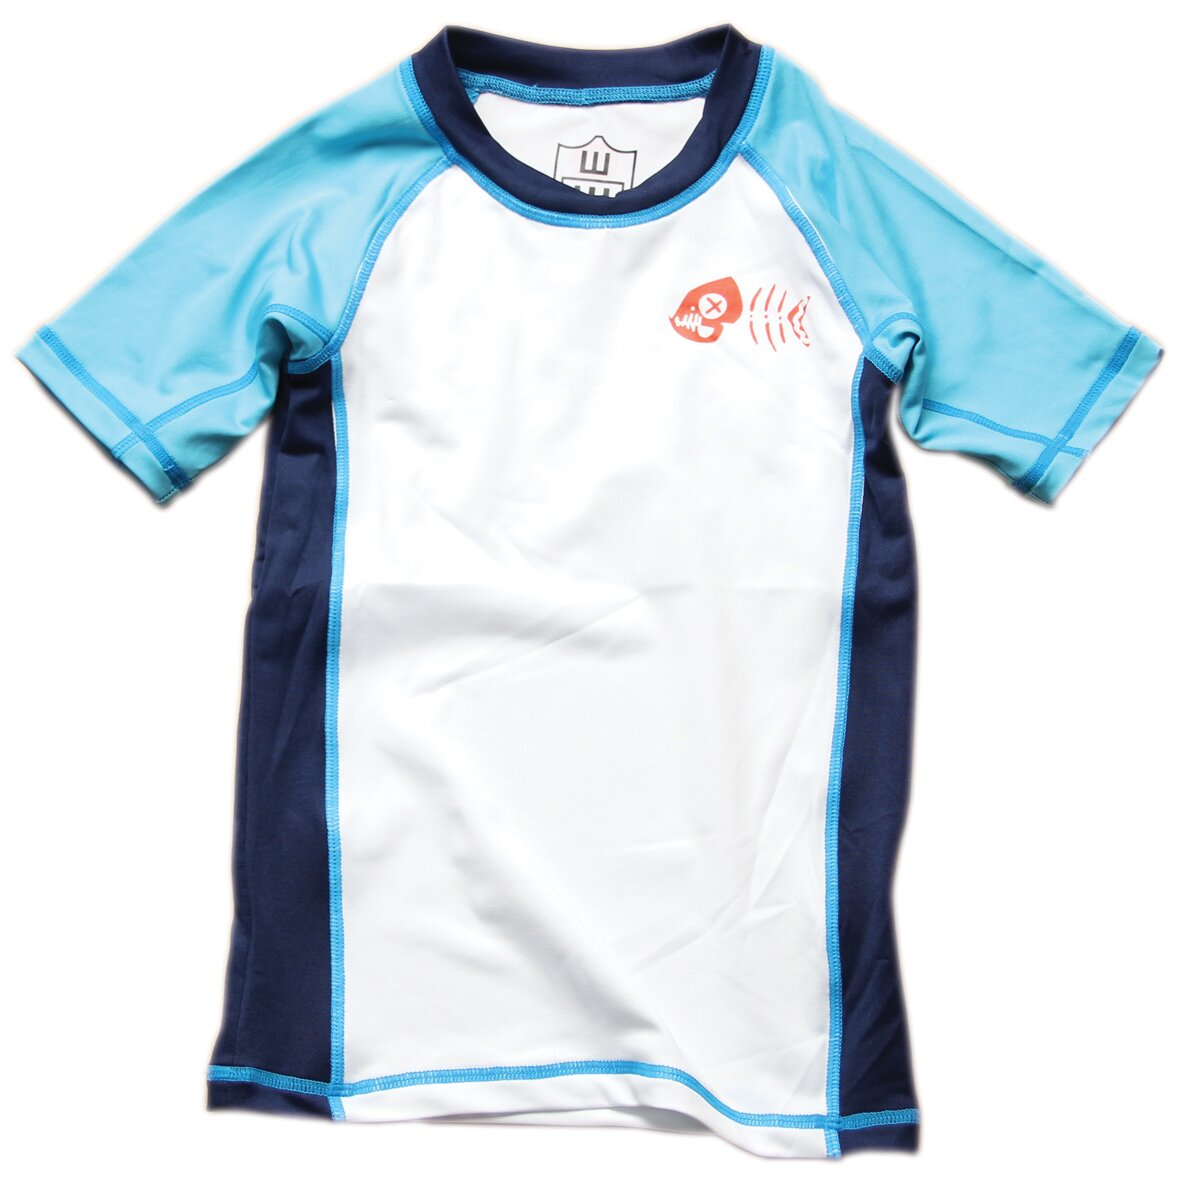 Boys' Nothing But Bones Rash Guard by Wes and Willy (Size: 6)